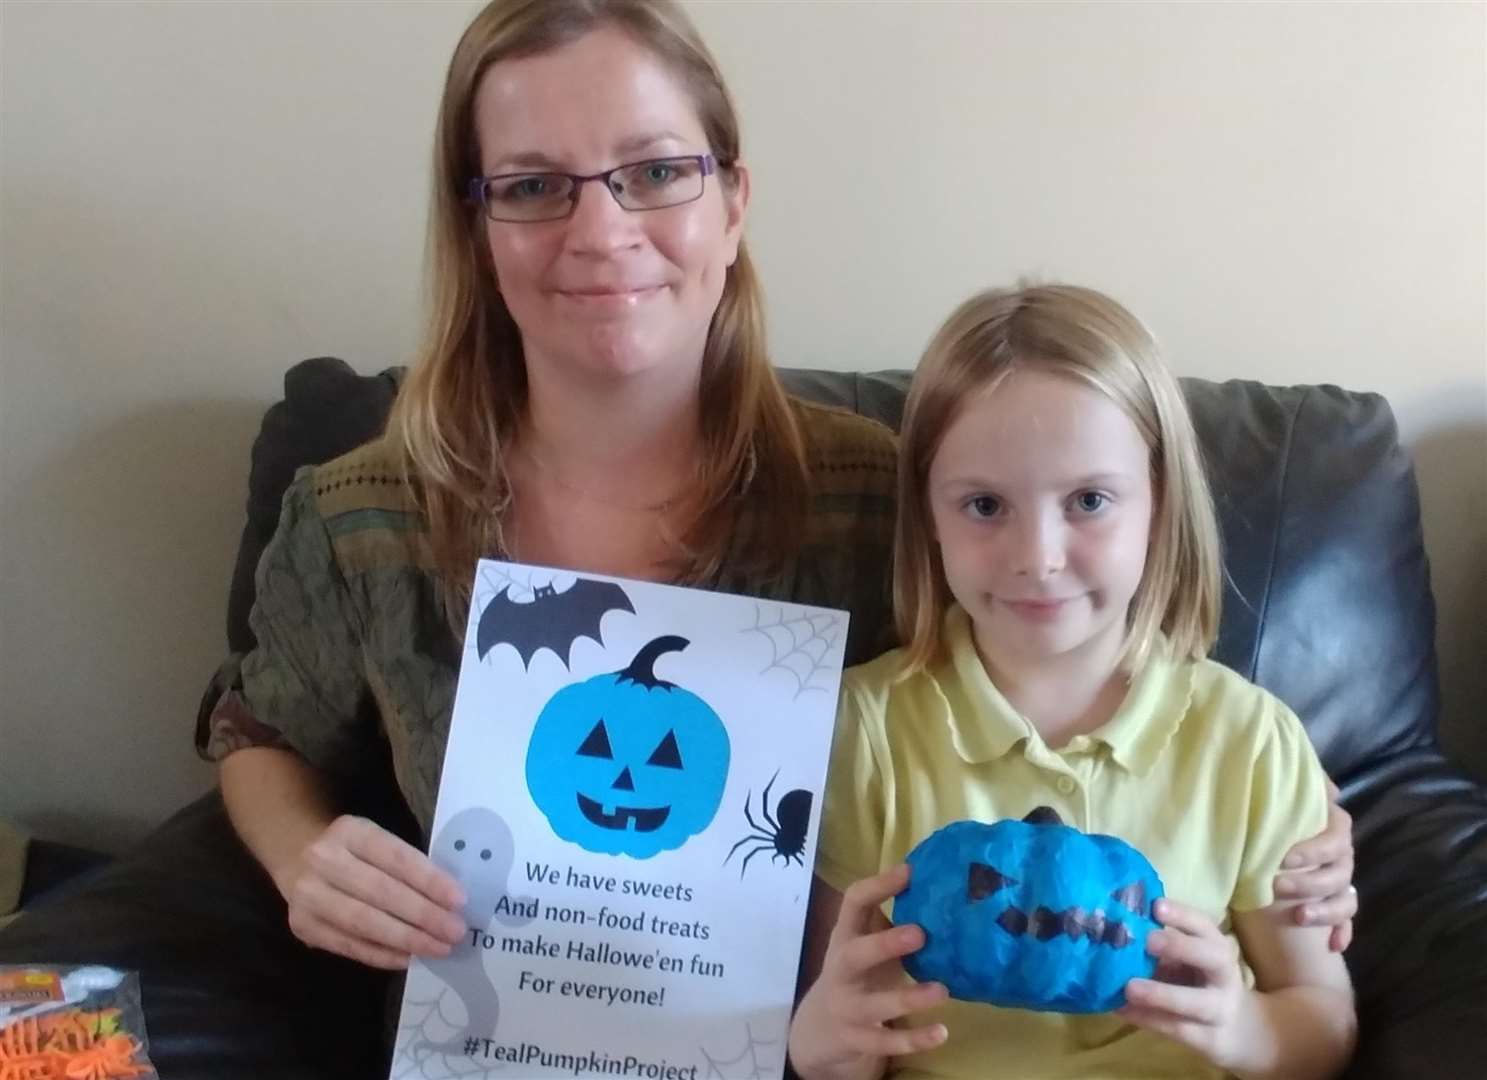 Tricks And (Non-Allergenic) Treats: Project Aims For Halloween Inclusion